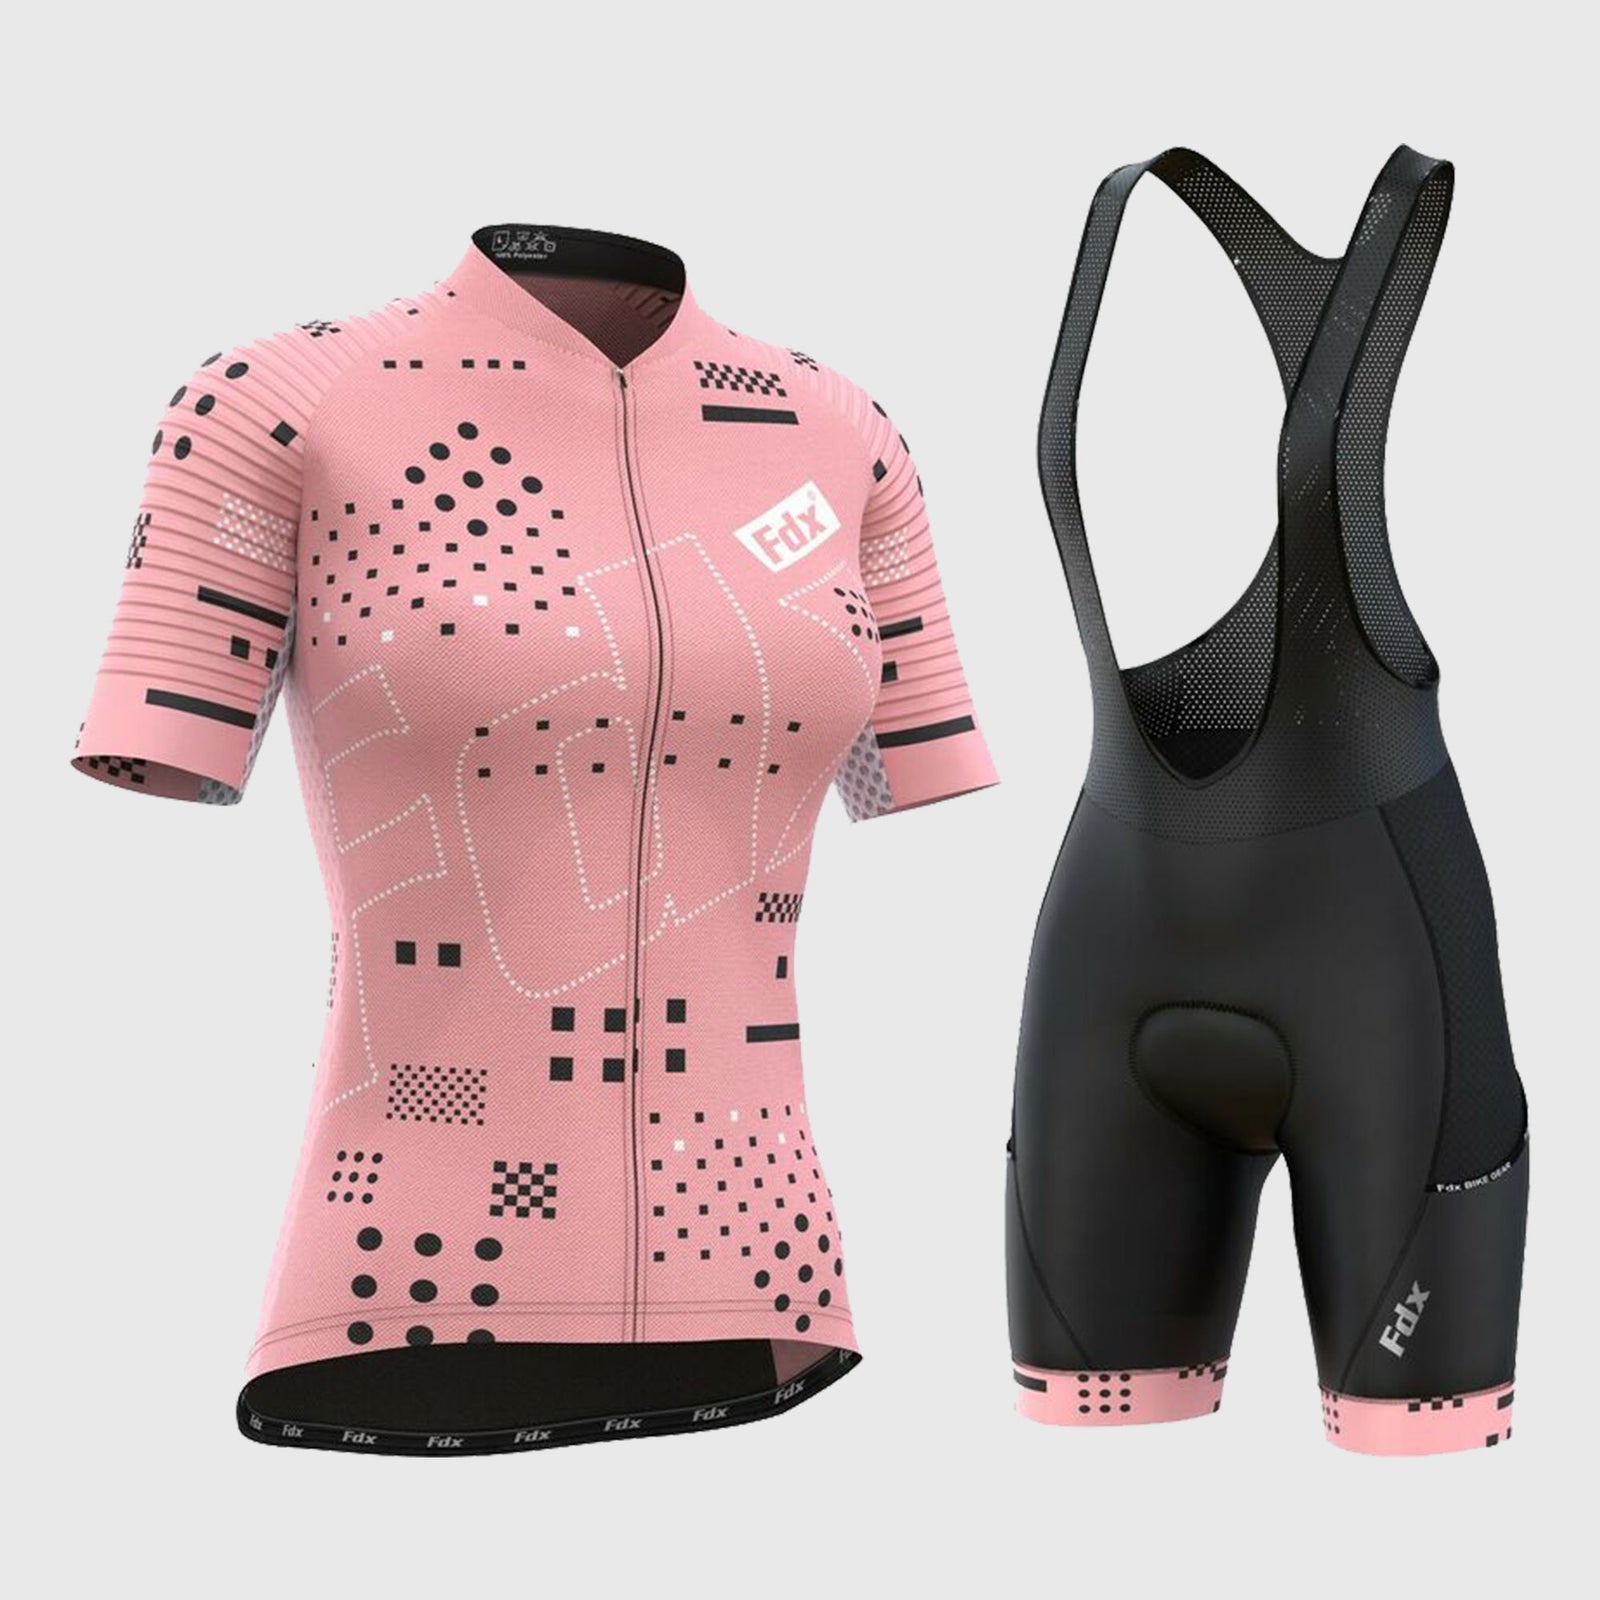 Buy Women's Cycling Clothing & Biking Accessories on Sale Prices